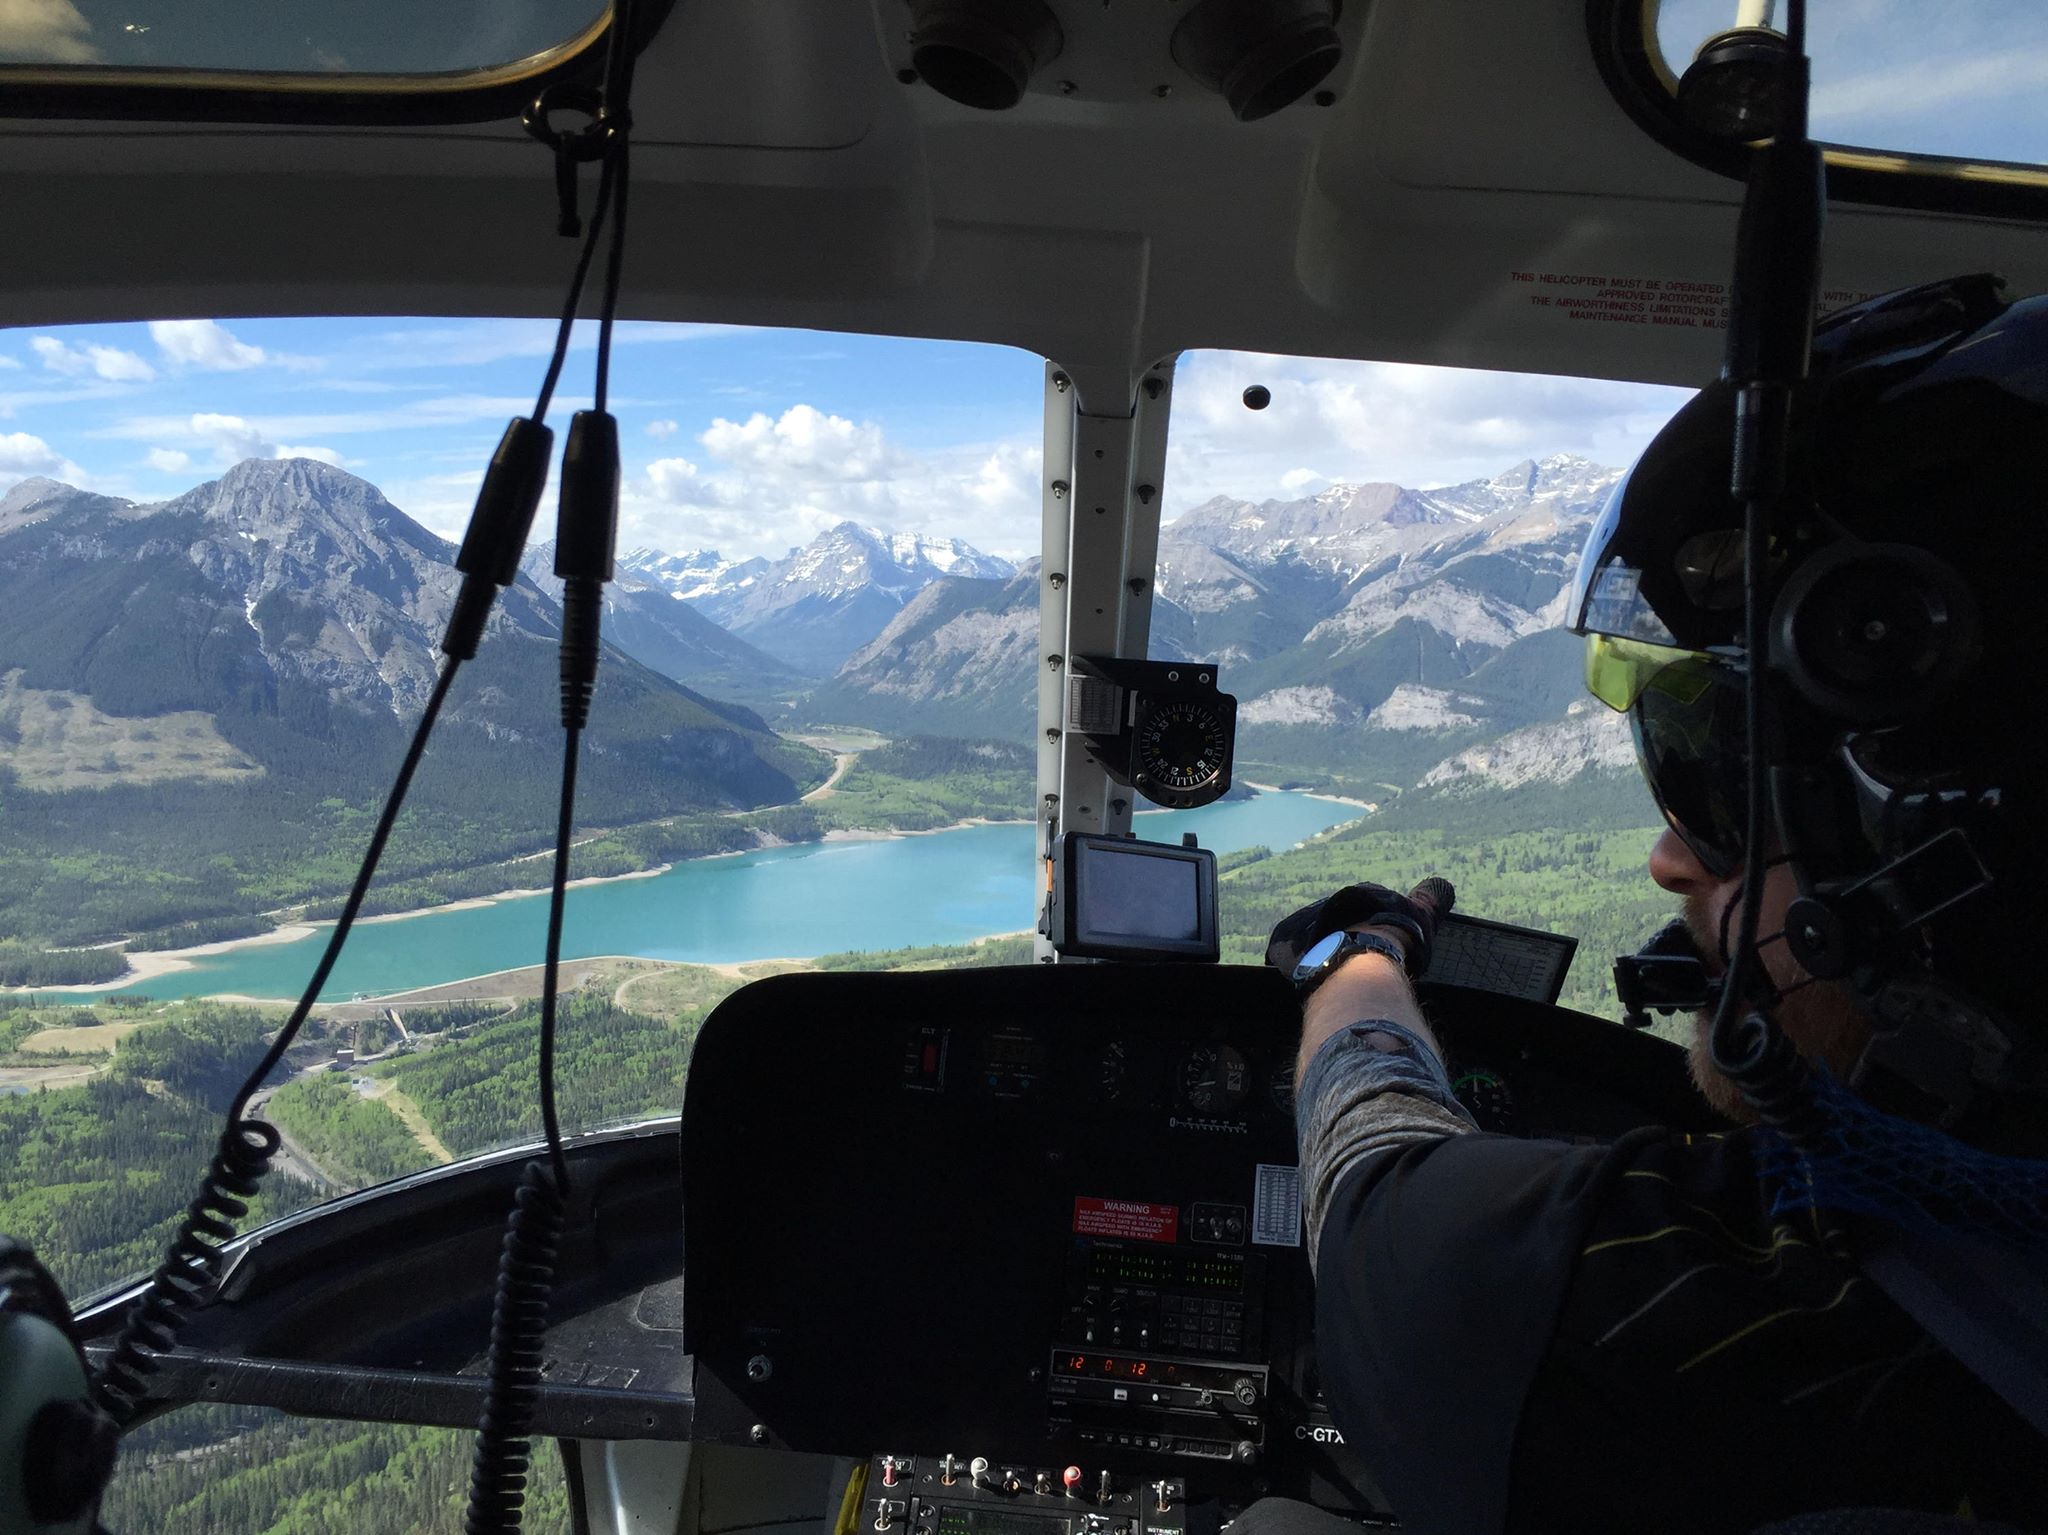 An exhilarating helicopter ride above Banff, Alberta reveals turquoise lakes and snowcapped peaks.